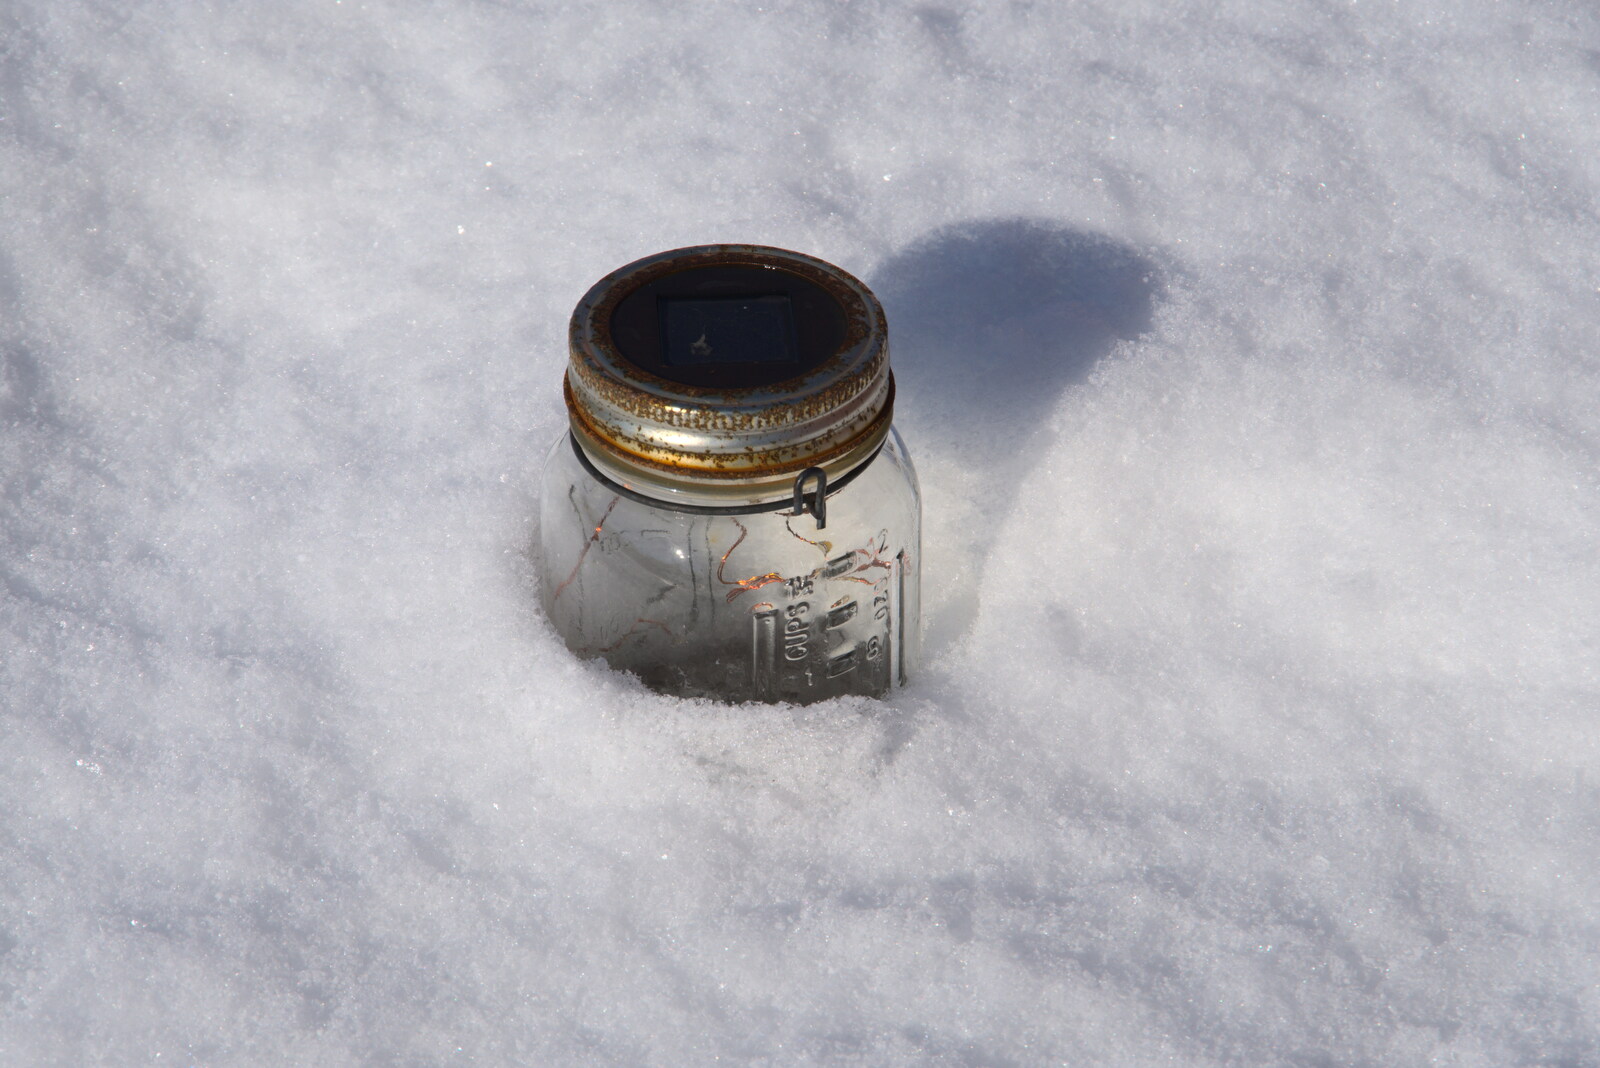 A jar is almost completely buried from Derelict Infants School and Ice Sculptures, Diss and Palgrave, Norfolk and Suffolk - 13th February 2021